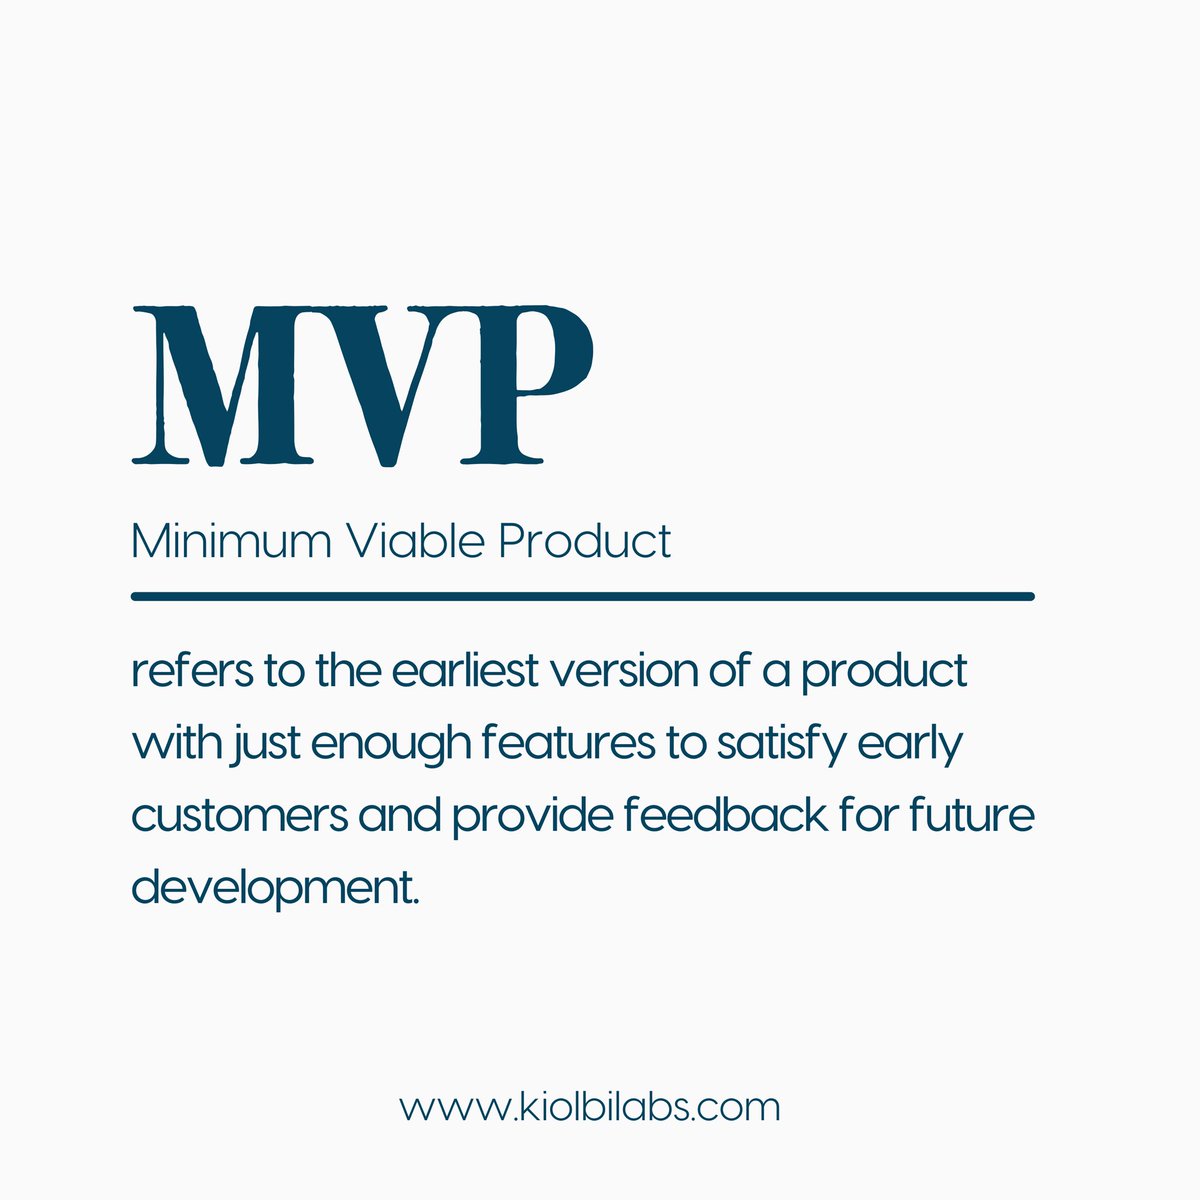 Ever wondered what MVP means in the world of Product Management? 
Learn how mastering concepts like this can skyrocket your career with our training program! Sign up via the link in bio.
 
#productmanagement #kiolbilabs #tech #productmanagementcohort #trainingprogram